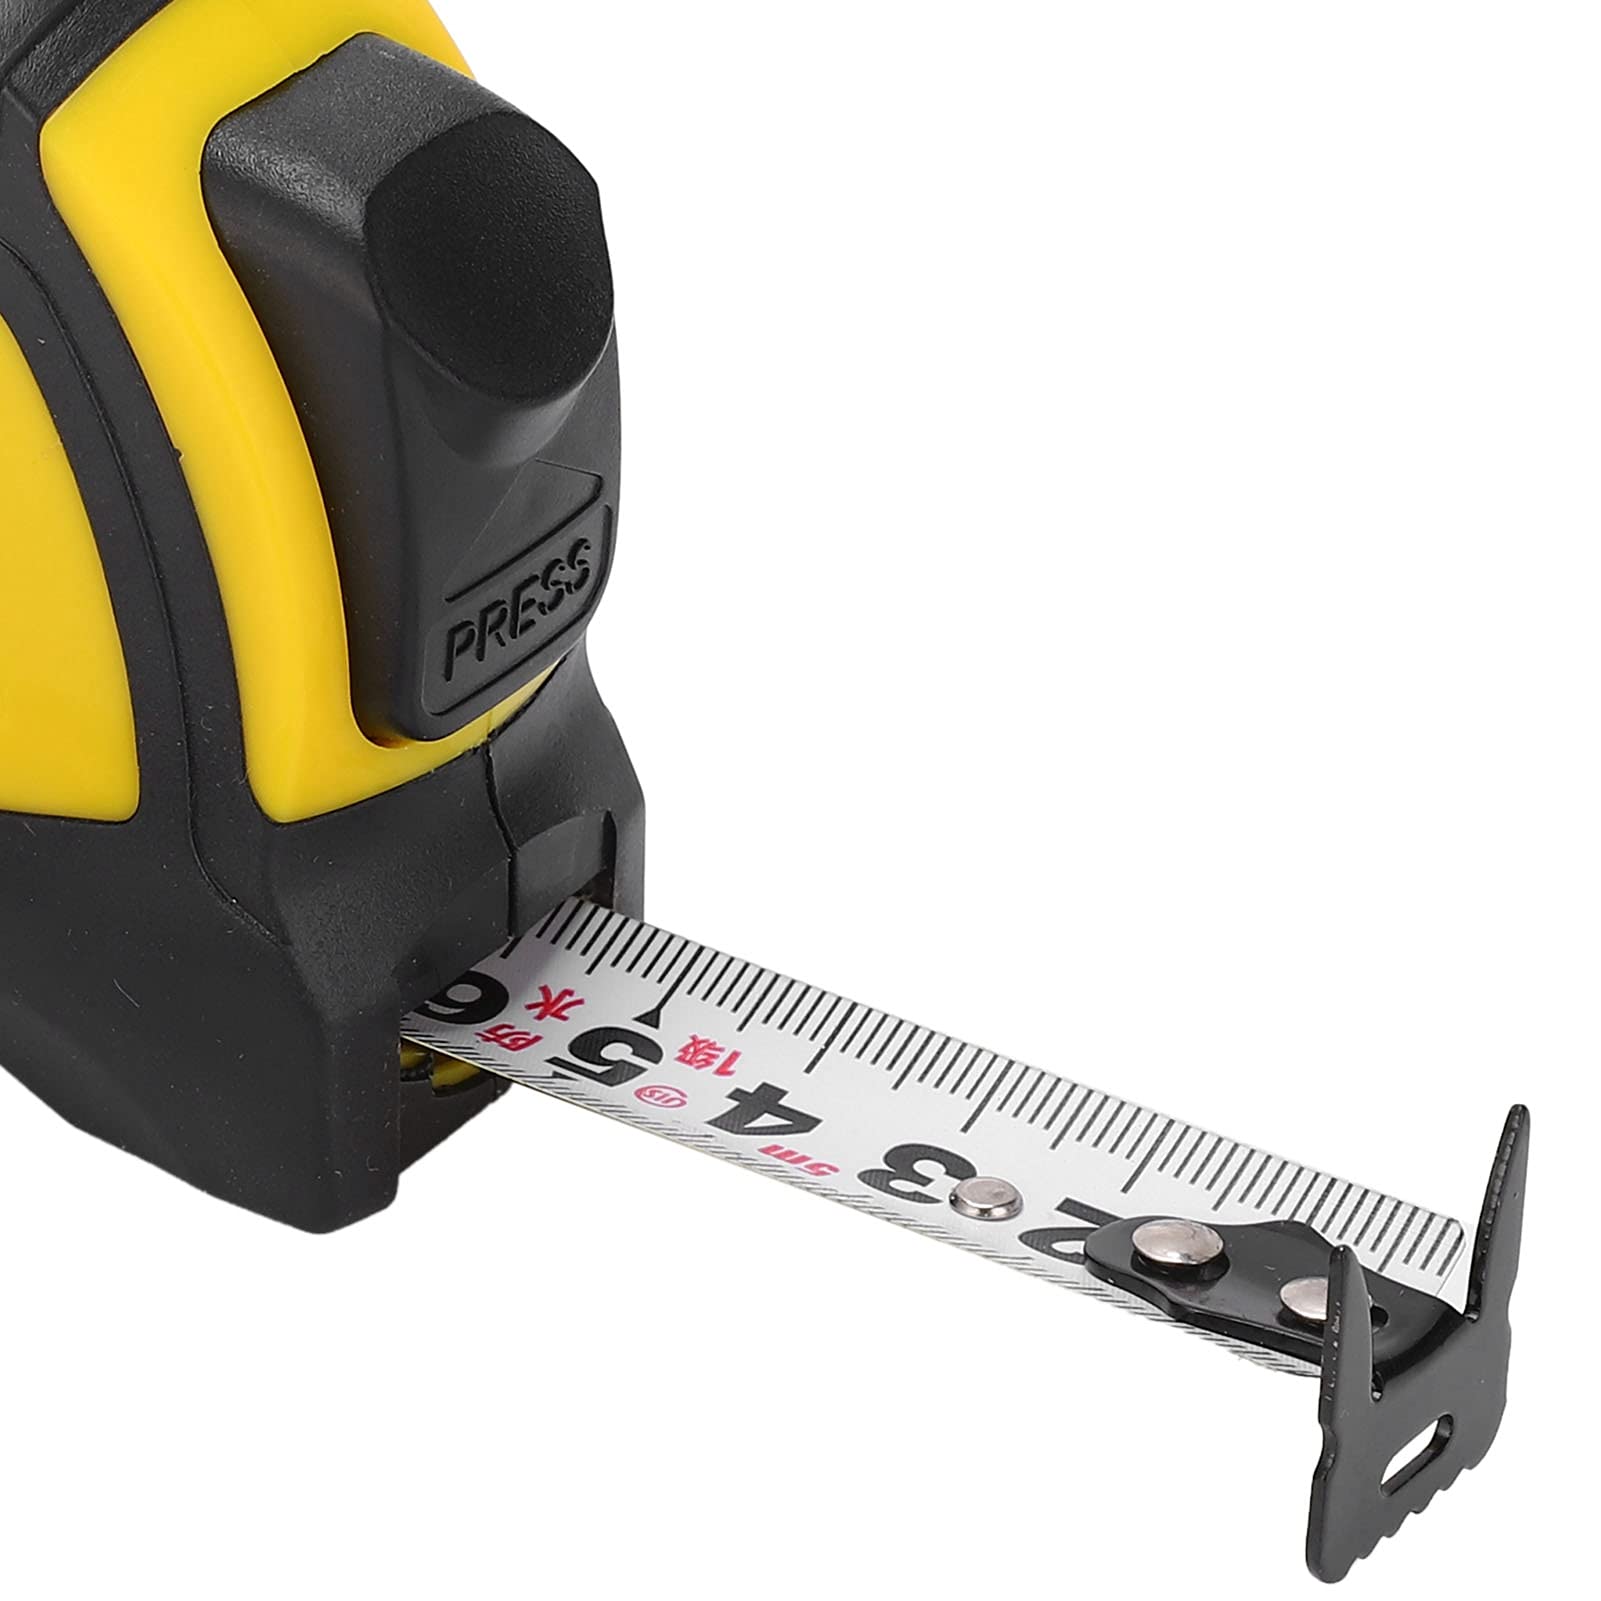 16.4ftx0.7in Steel Measure Tape, Retractable Dual Side Ruler with Metric System, Imperial System and Luban System, Auto Lock High Accuracy Heavy Duty Tape Measure Steel Blade Tape Measure